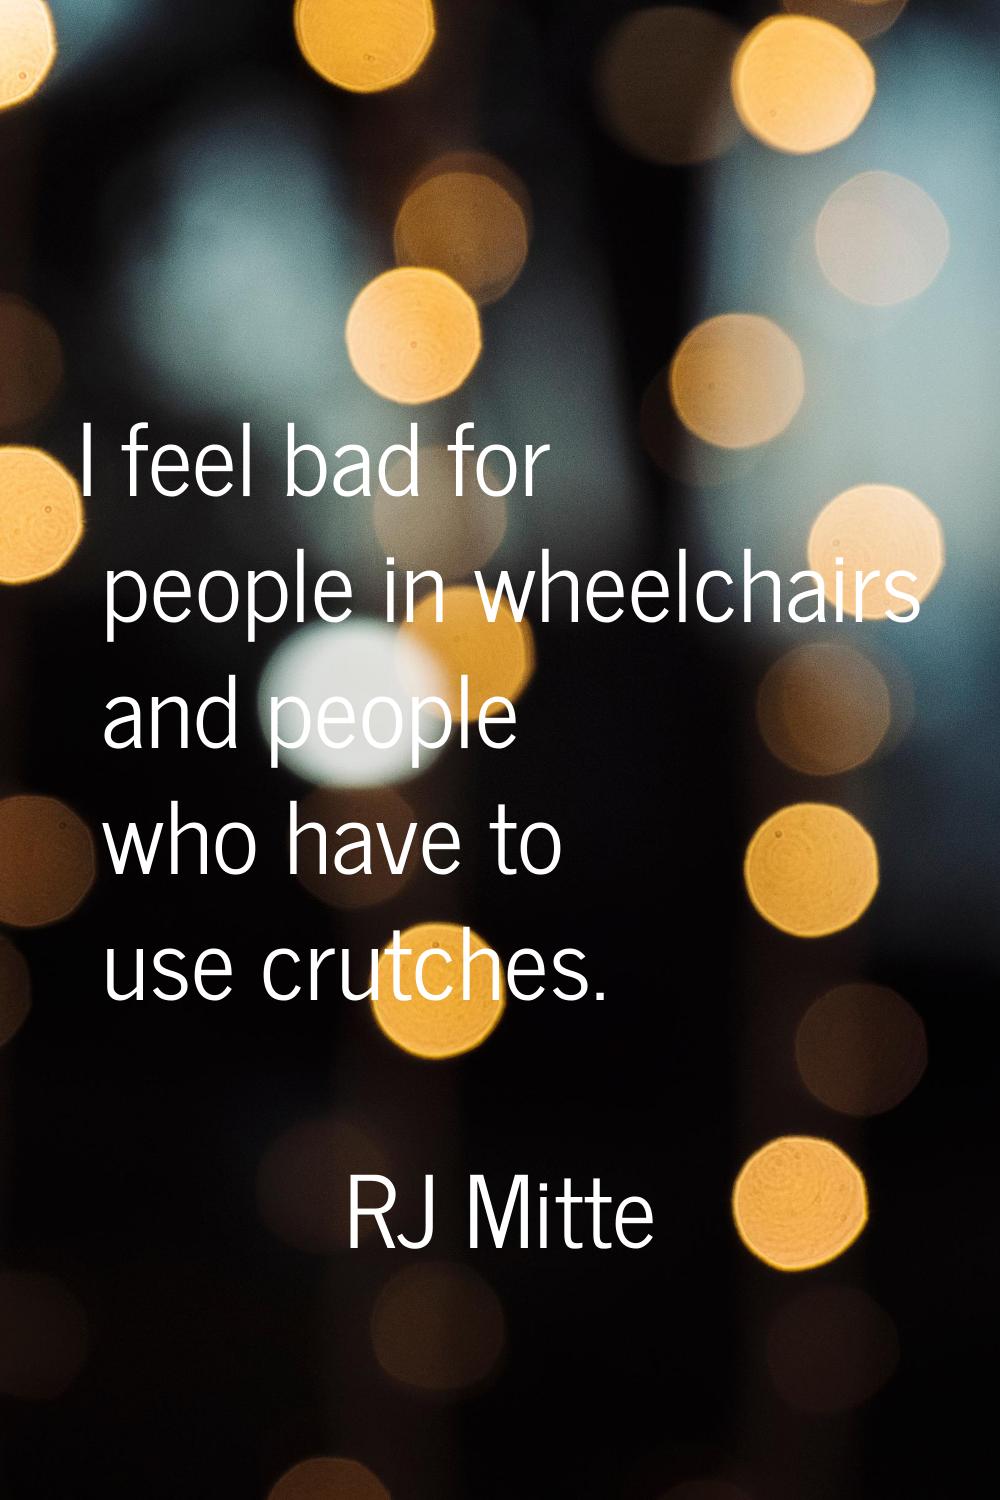 I feel bad for people in wheelchairs and people who have to use crutches.